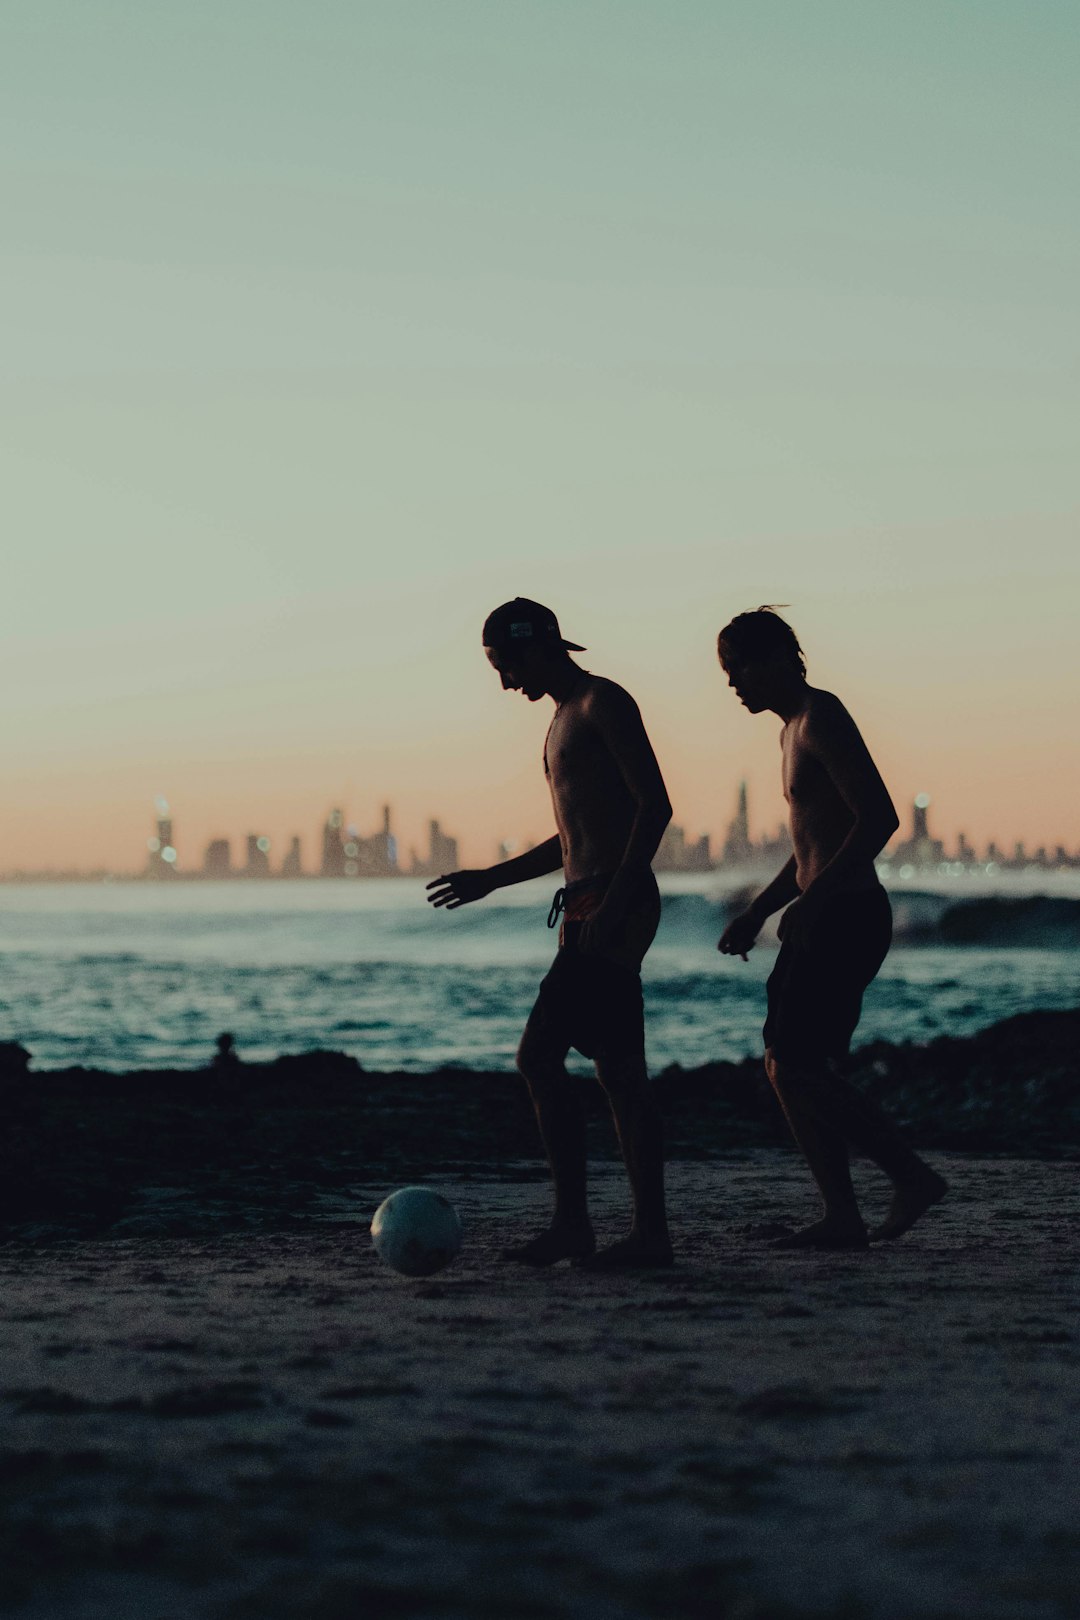 2 men playing soccer on beach during sunset